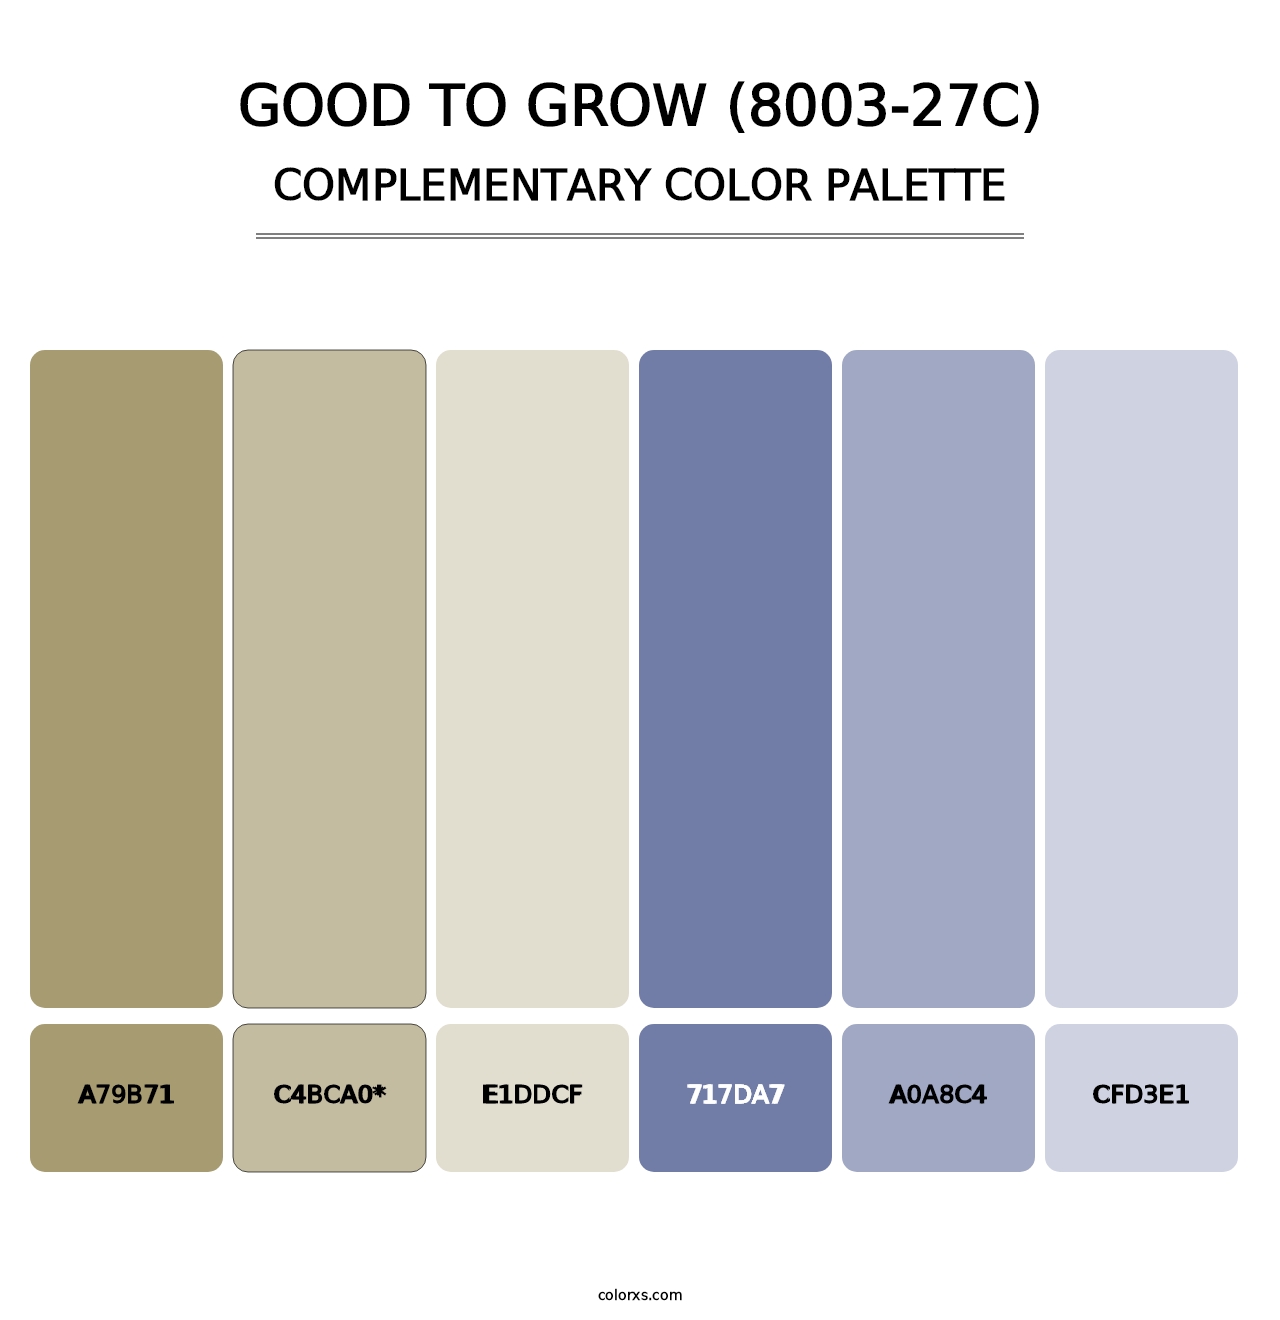 Good to Grow (8003-27C) - Complementary Color Palette